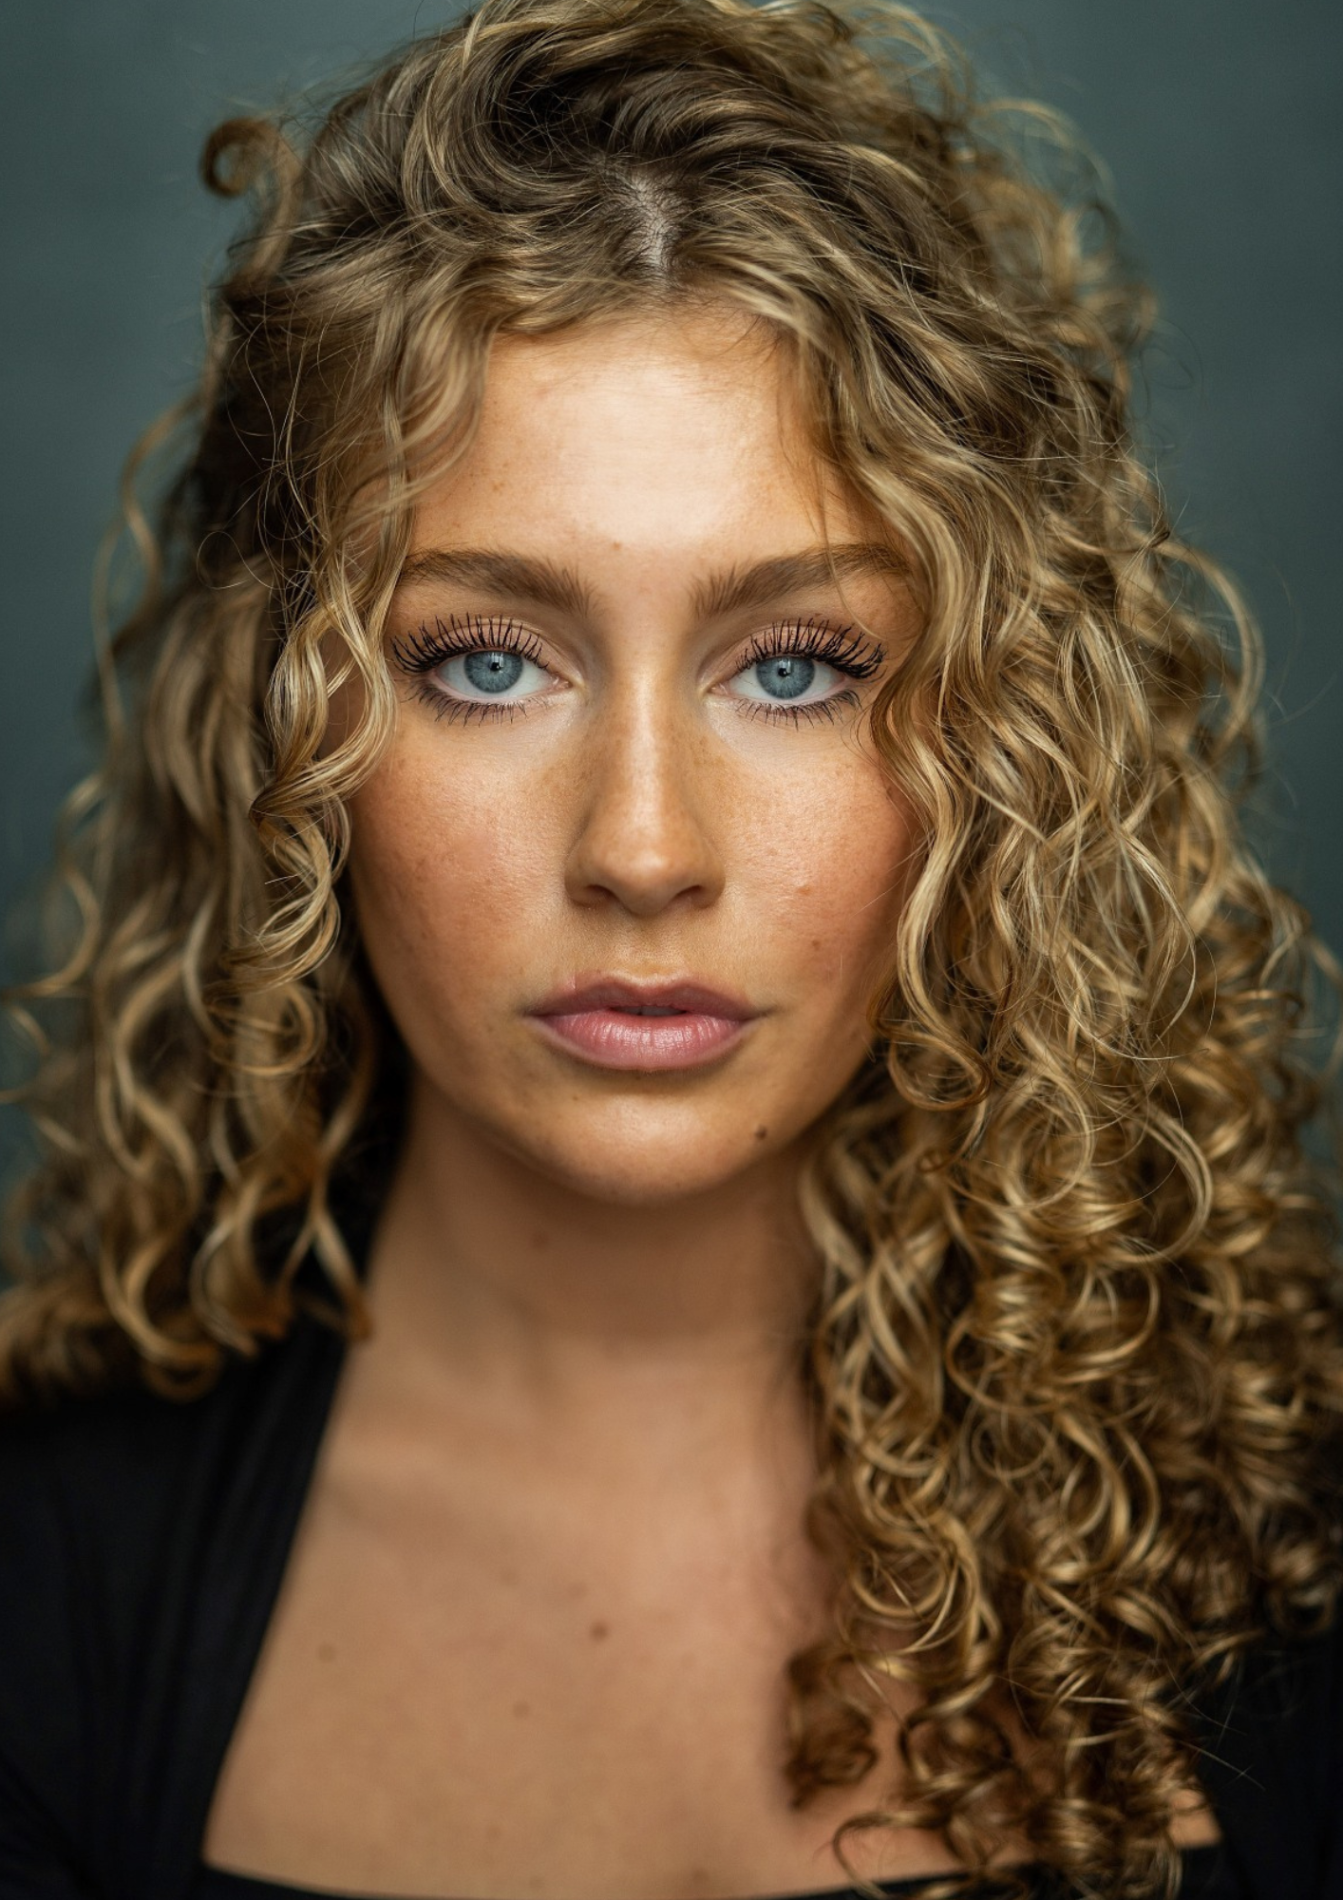 A headshot of a woman. She has blue eyes and long blonde curly hair. She wears a black blouse.